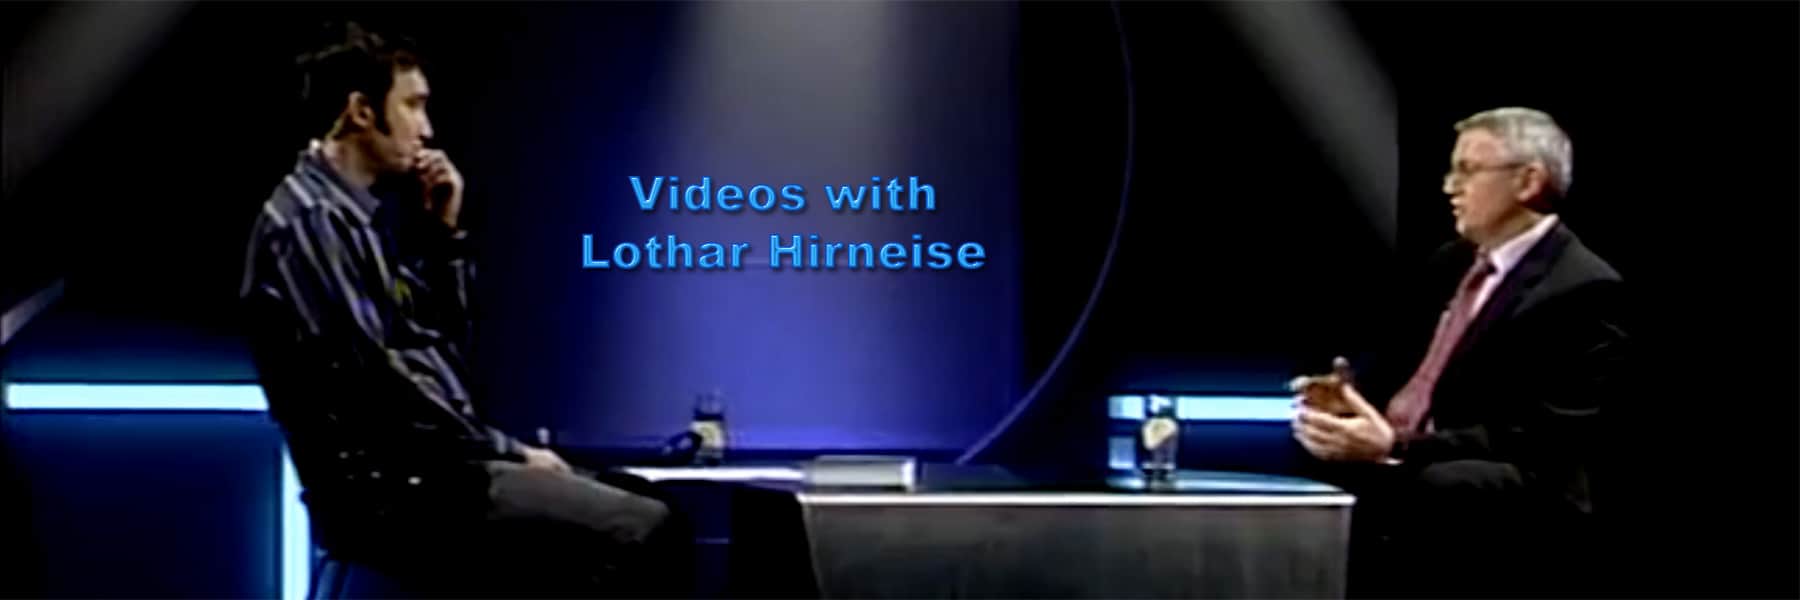 videos with Lothar Hirneise